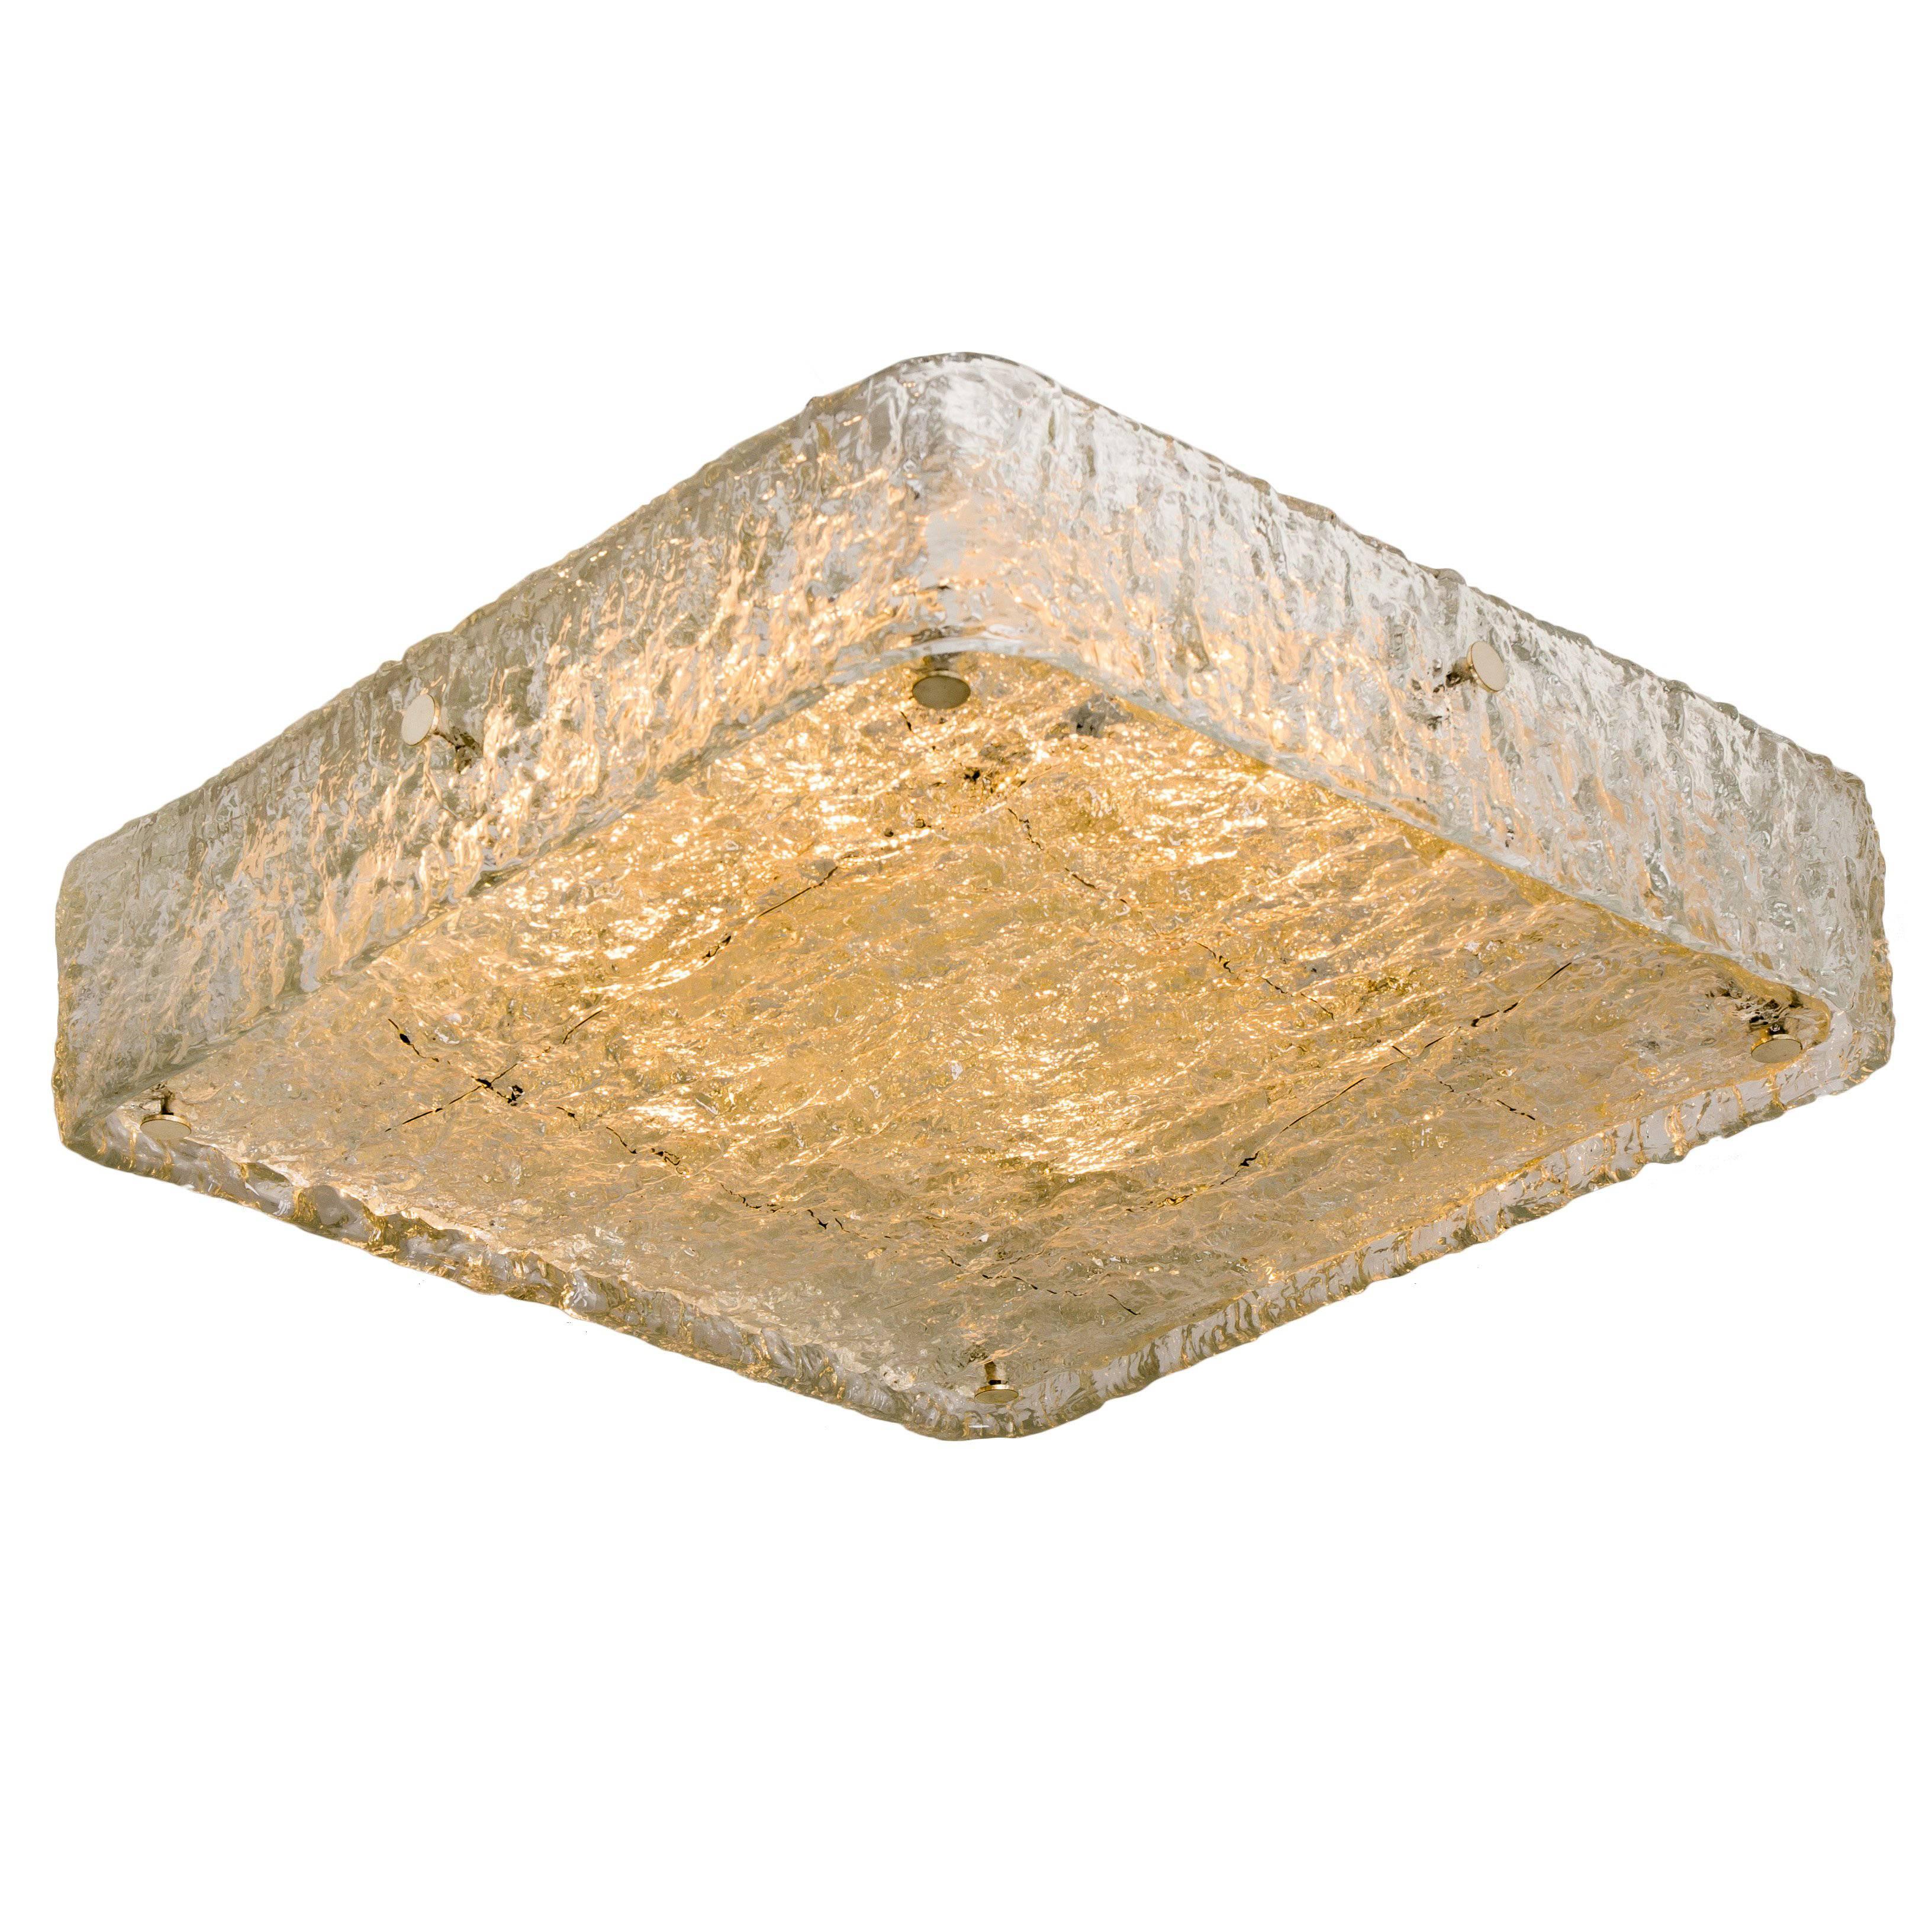 1 of the 3 handmade high quality light fixture made by J.T. Kalmar, Austria, manufactured in midcentury, circa 1970 (at the end of 1960s and beginning of 1970s).

This flushmount or ceiling light features four sheets made of handmade, think